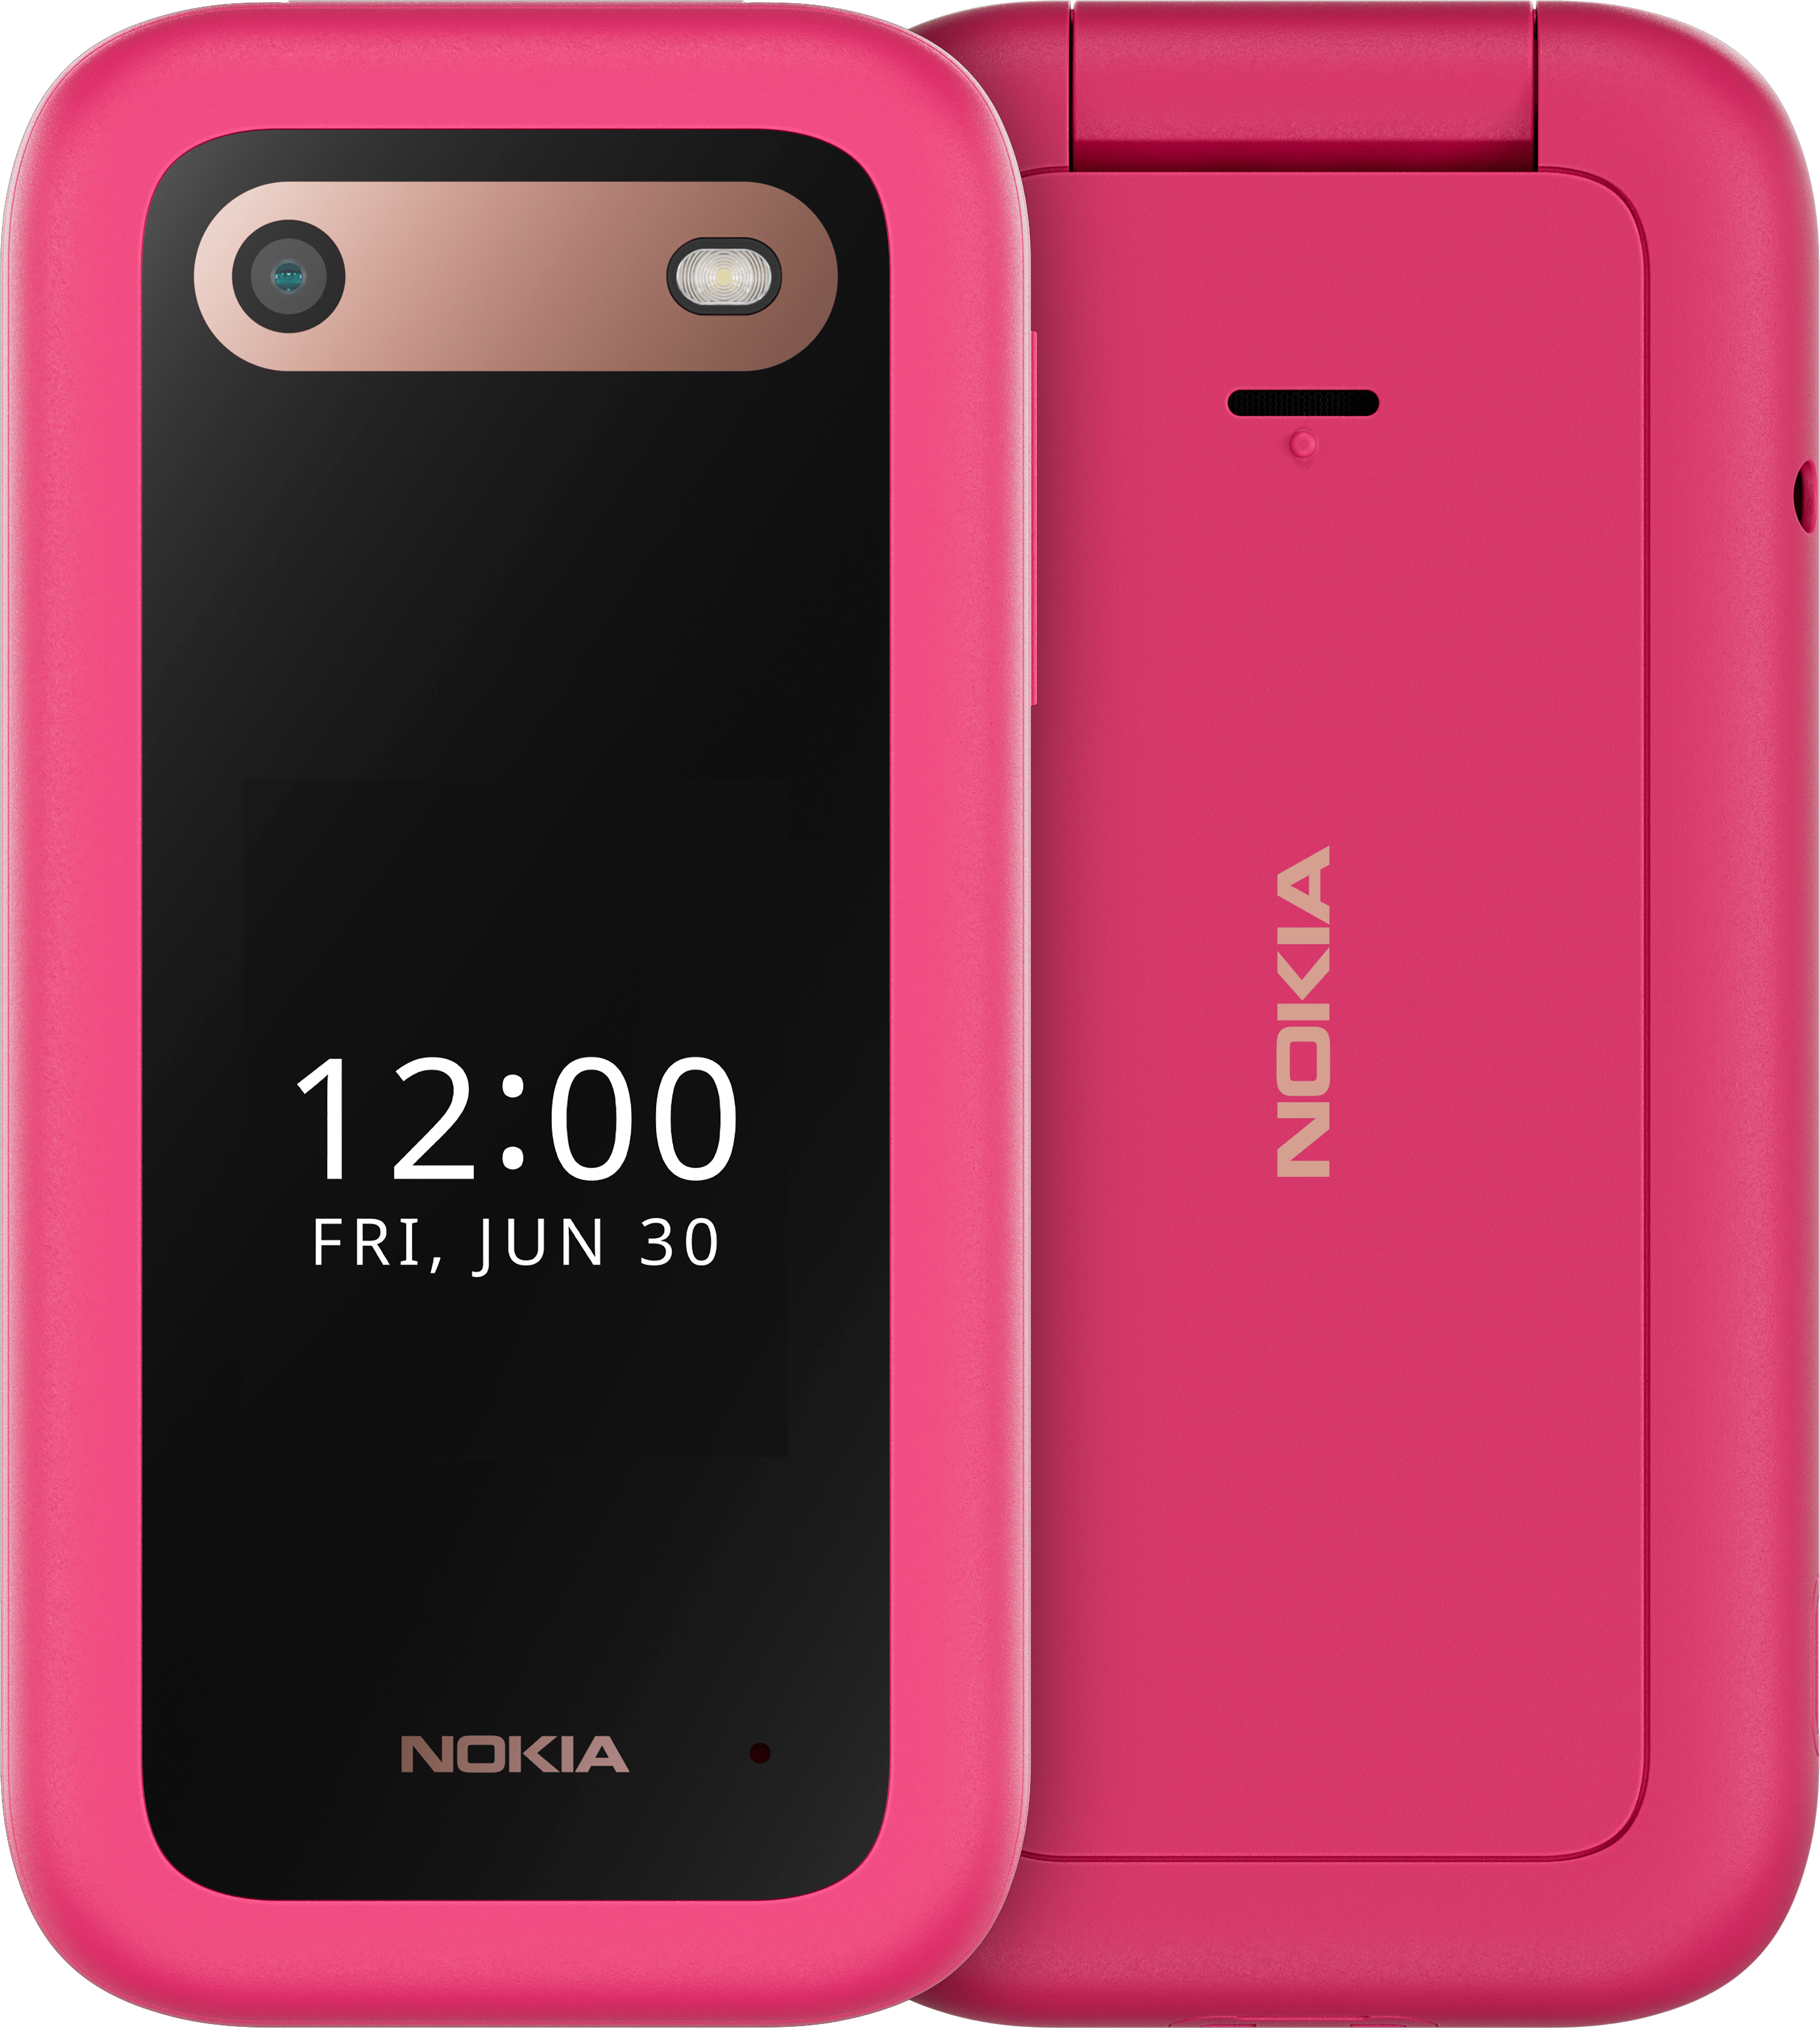 Nokia and 5G fashionable: So G42 Repairable Pink goes